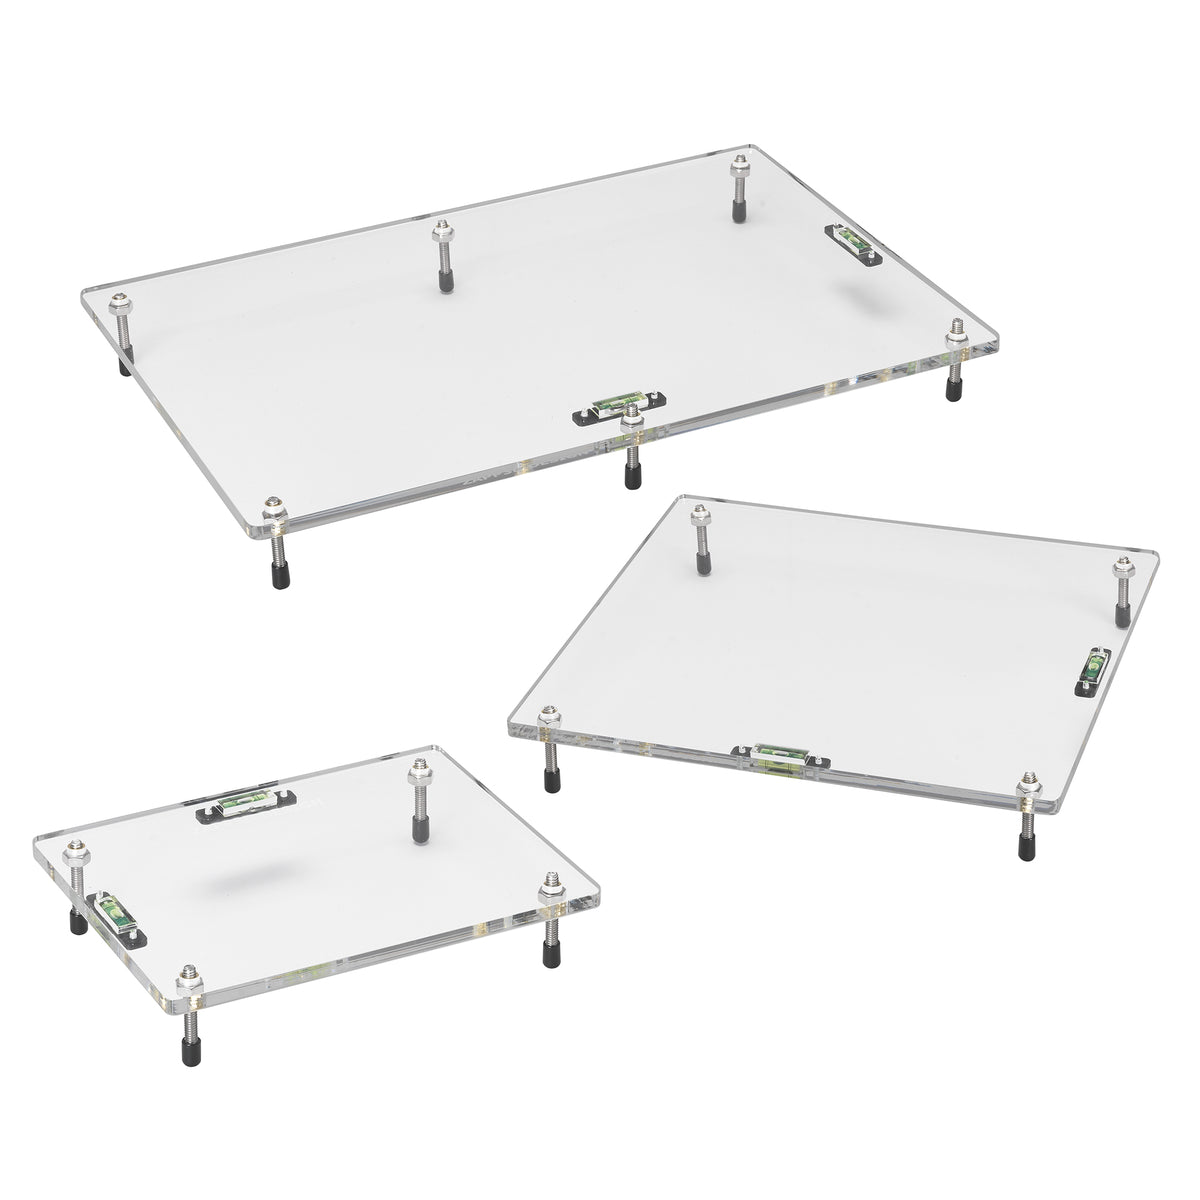 Resin Leveling Table for Epoxy Resin & Art, 16 x 14 Adjustable Surface  Leveling Board with Silicone Mat, Measuring Cup, Droppers and Wood Sticks,  Price $35. For USA. Interested DM me for